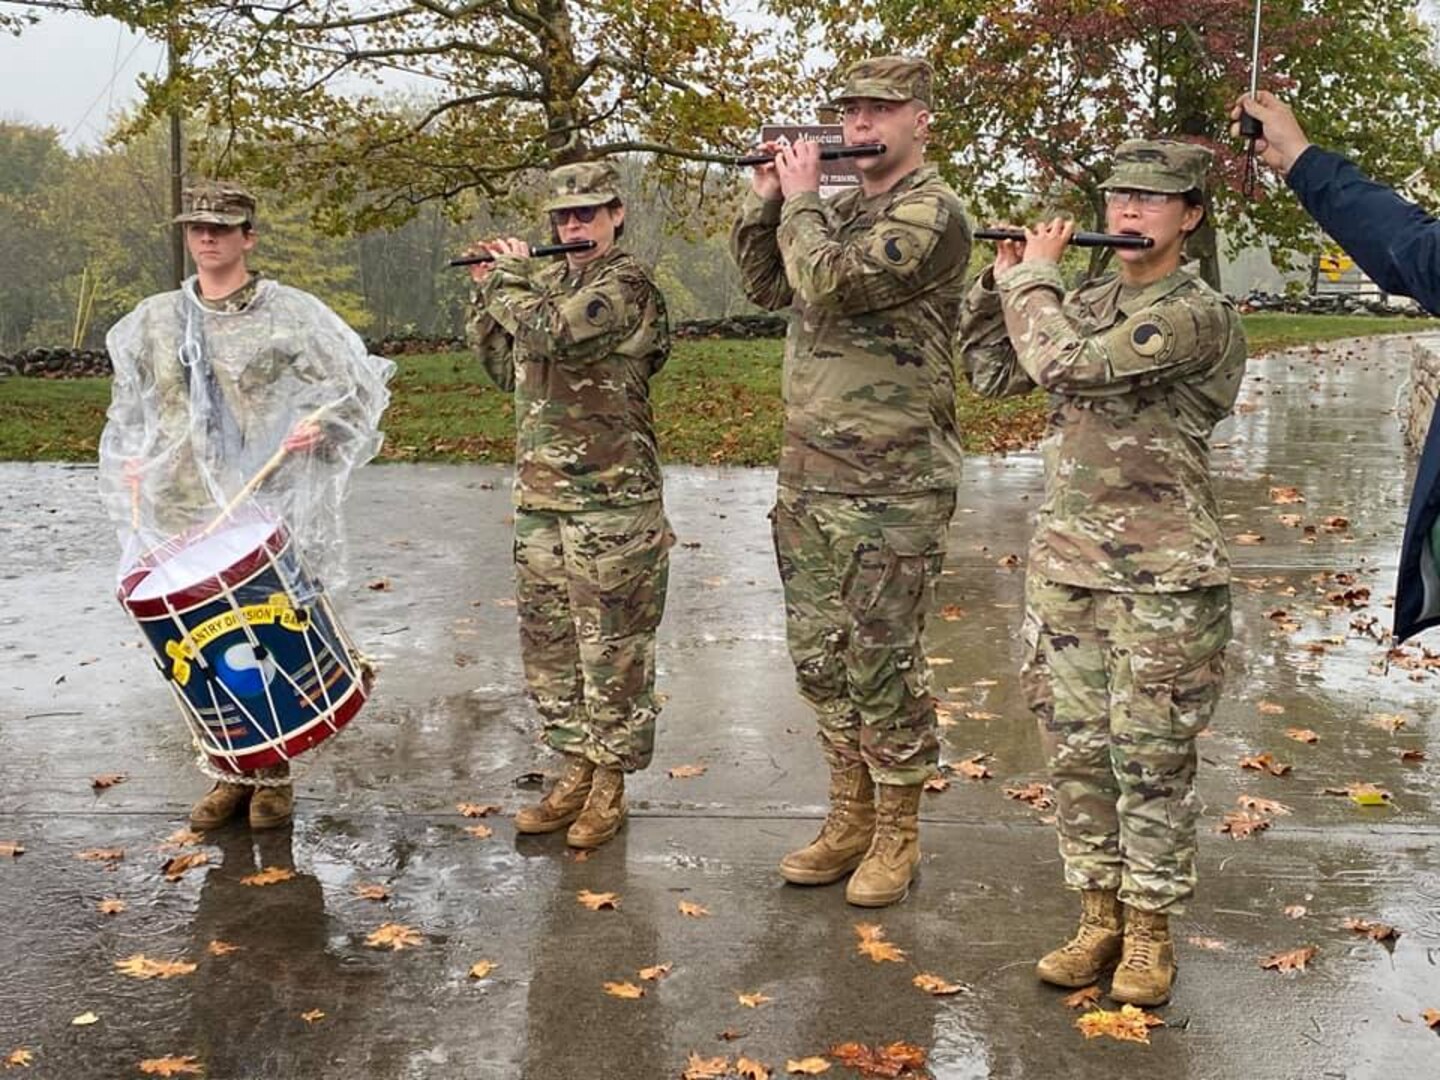 29th Infantry Division Band's Fife and Drums performs at Gettysburg